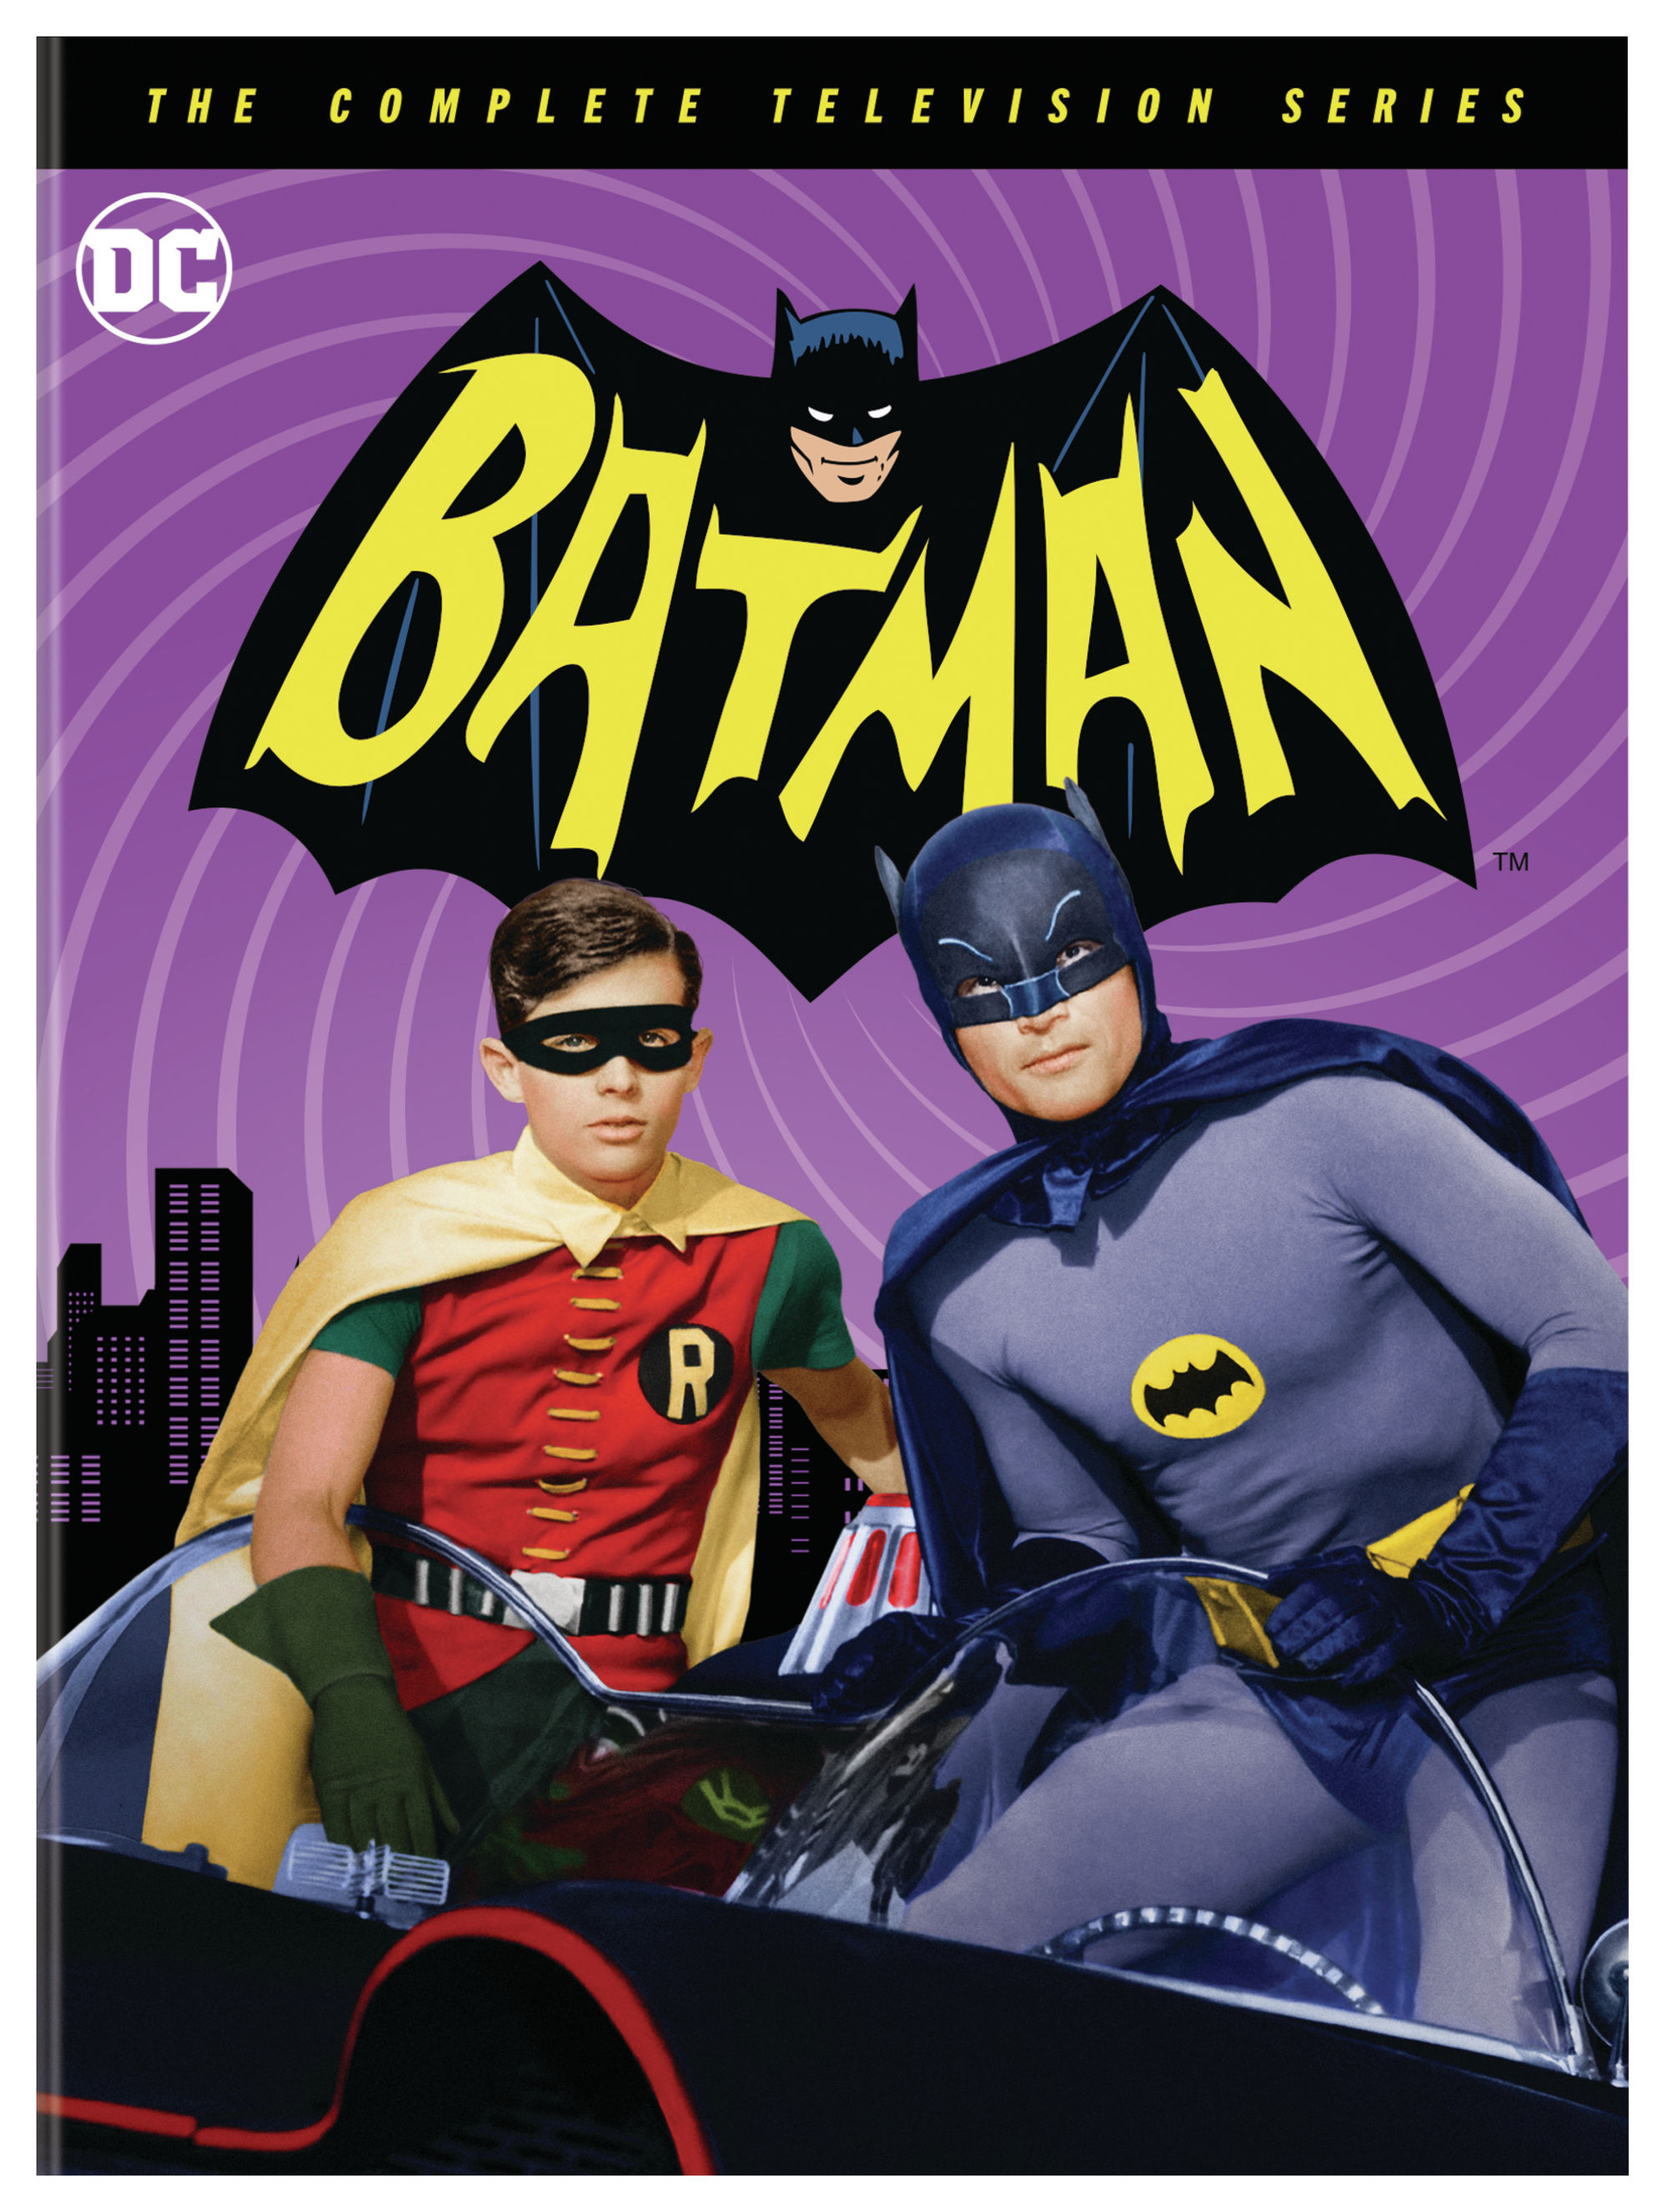 Batman: The Complete Original Series (Box Set) - DVD [ 1968 ]  - Comedy Television On DVD - TV Shows On GRUV